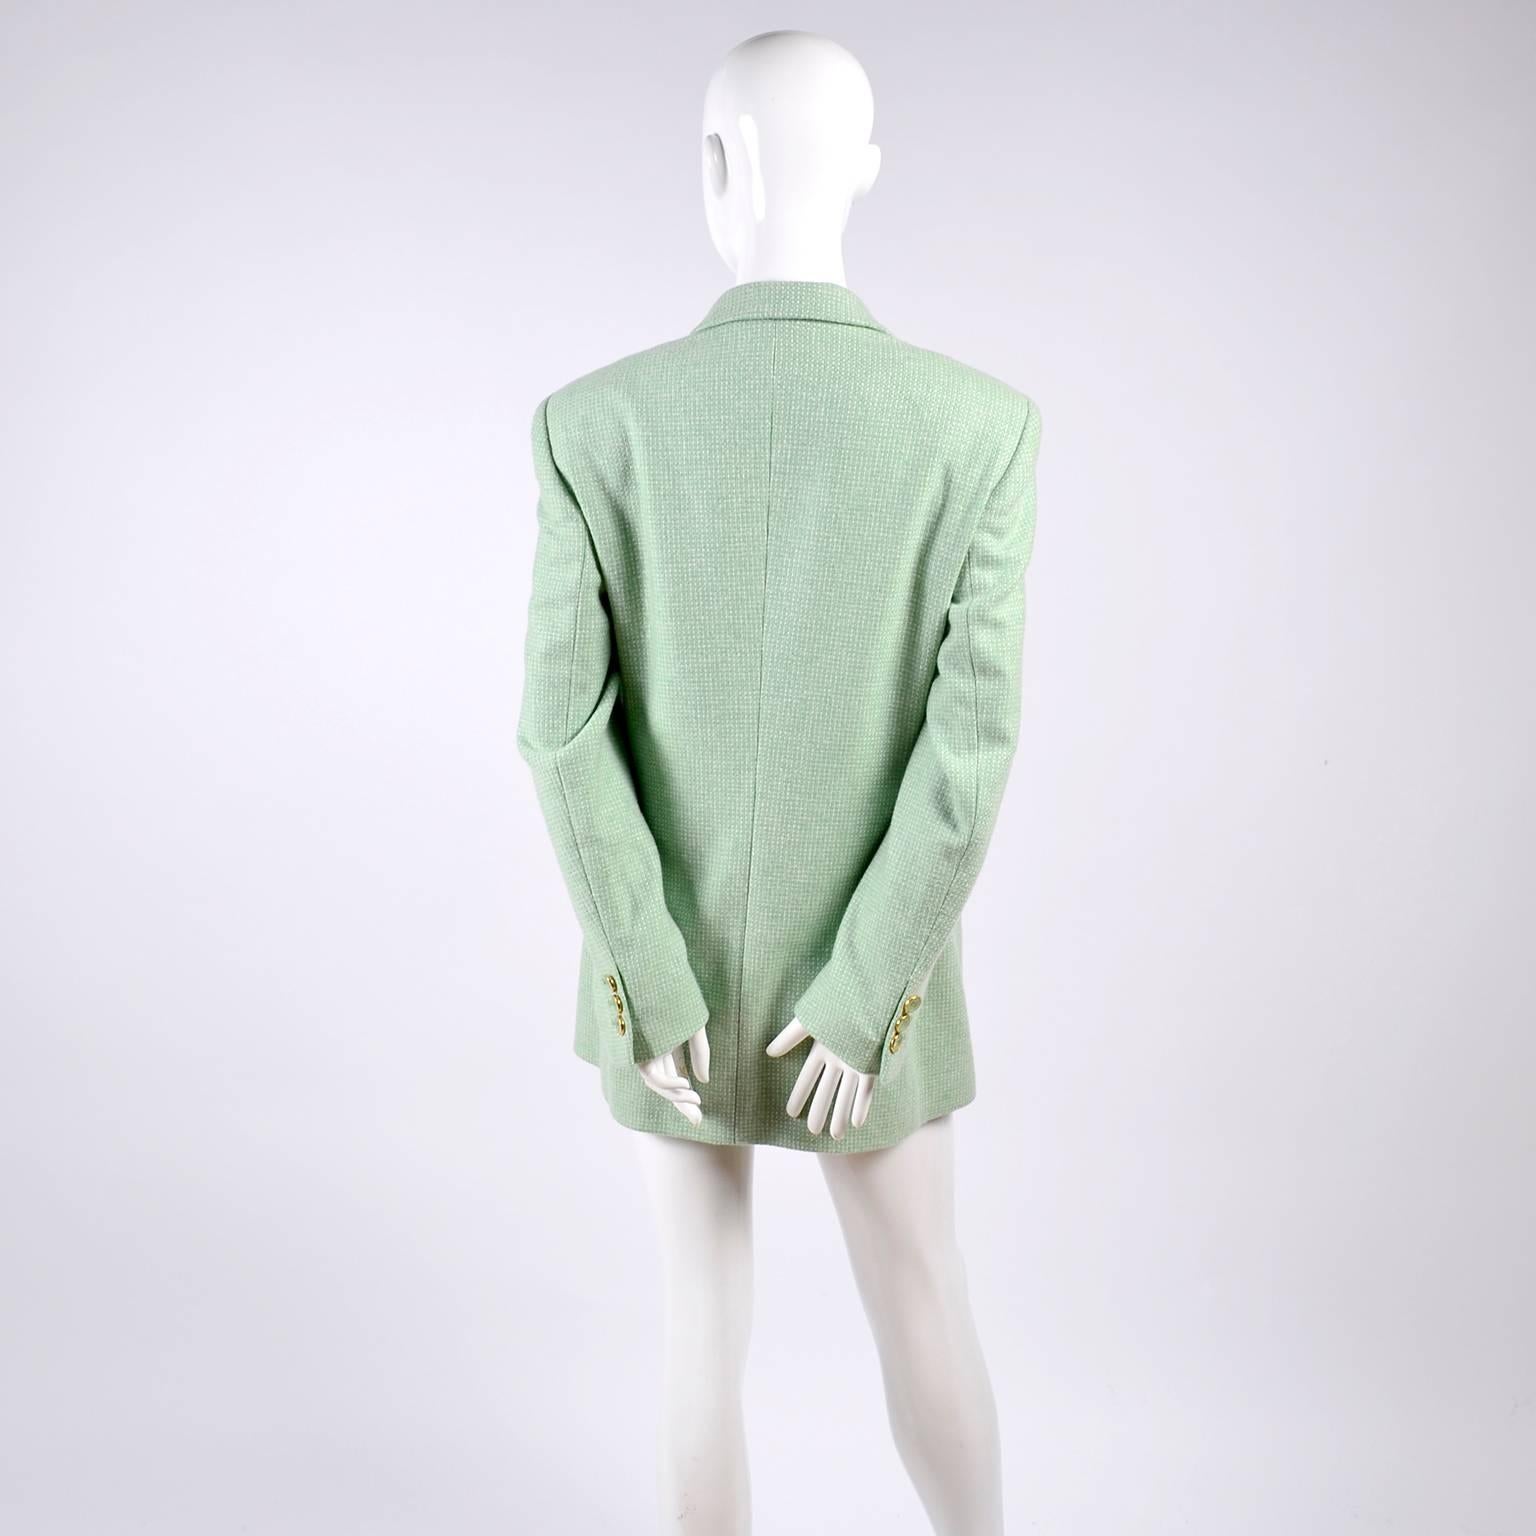 Escada Margaretha Ley Green Cashmere Blazer Jacket in Size 8 In Excellent Condition For Sale In Portland, OR